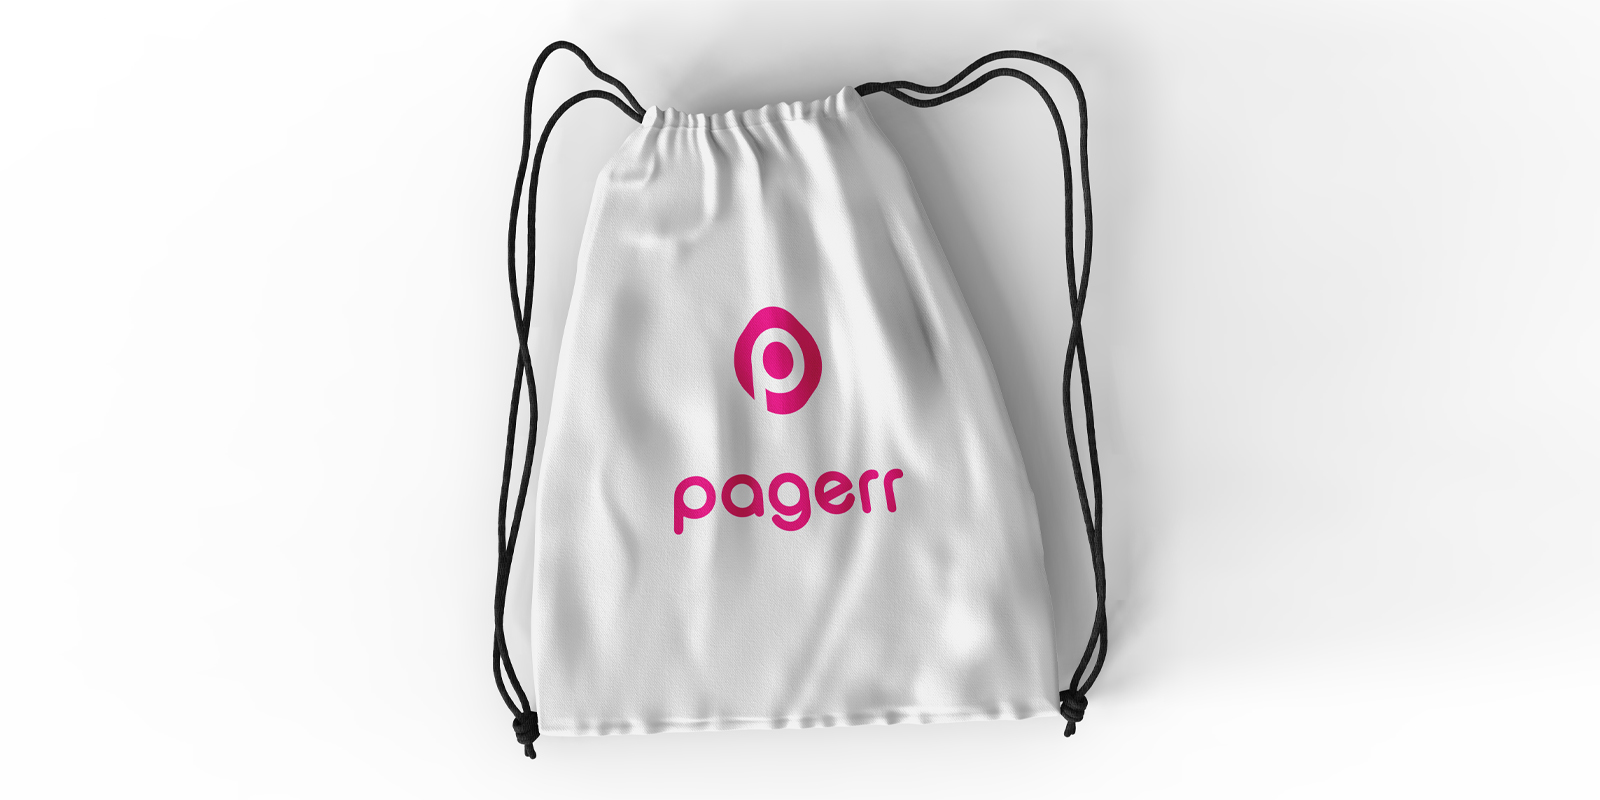 Drawstring backpacks in Gold Coast - Print with Pagerr